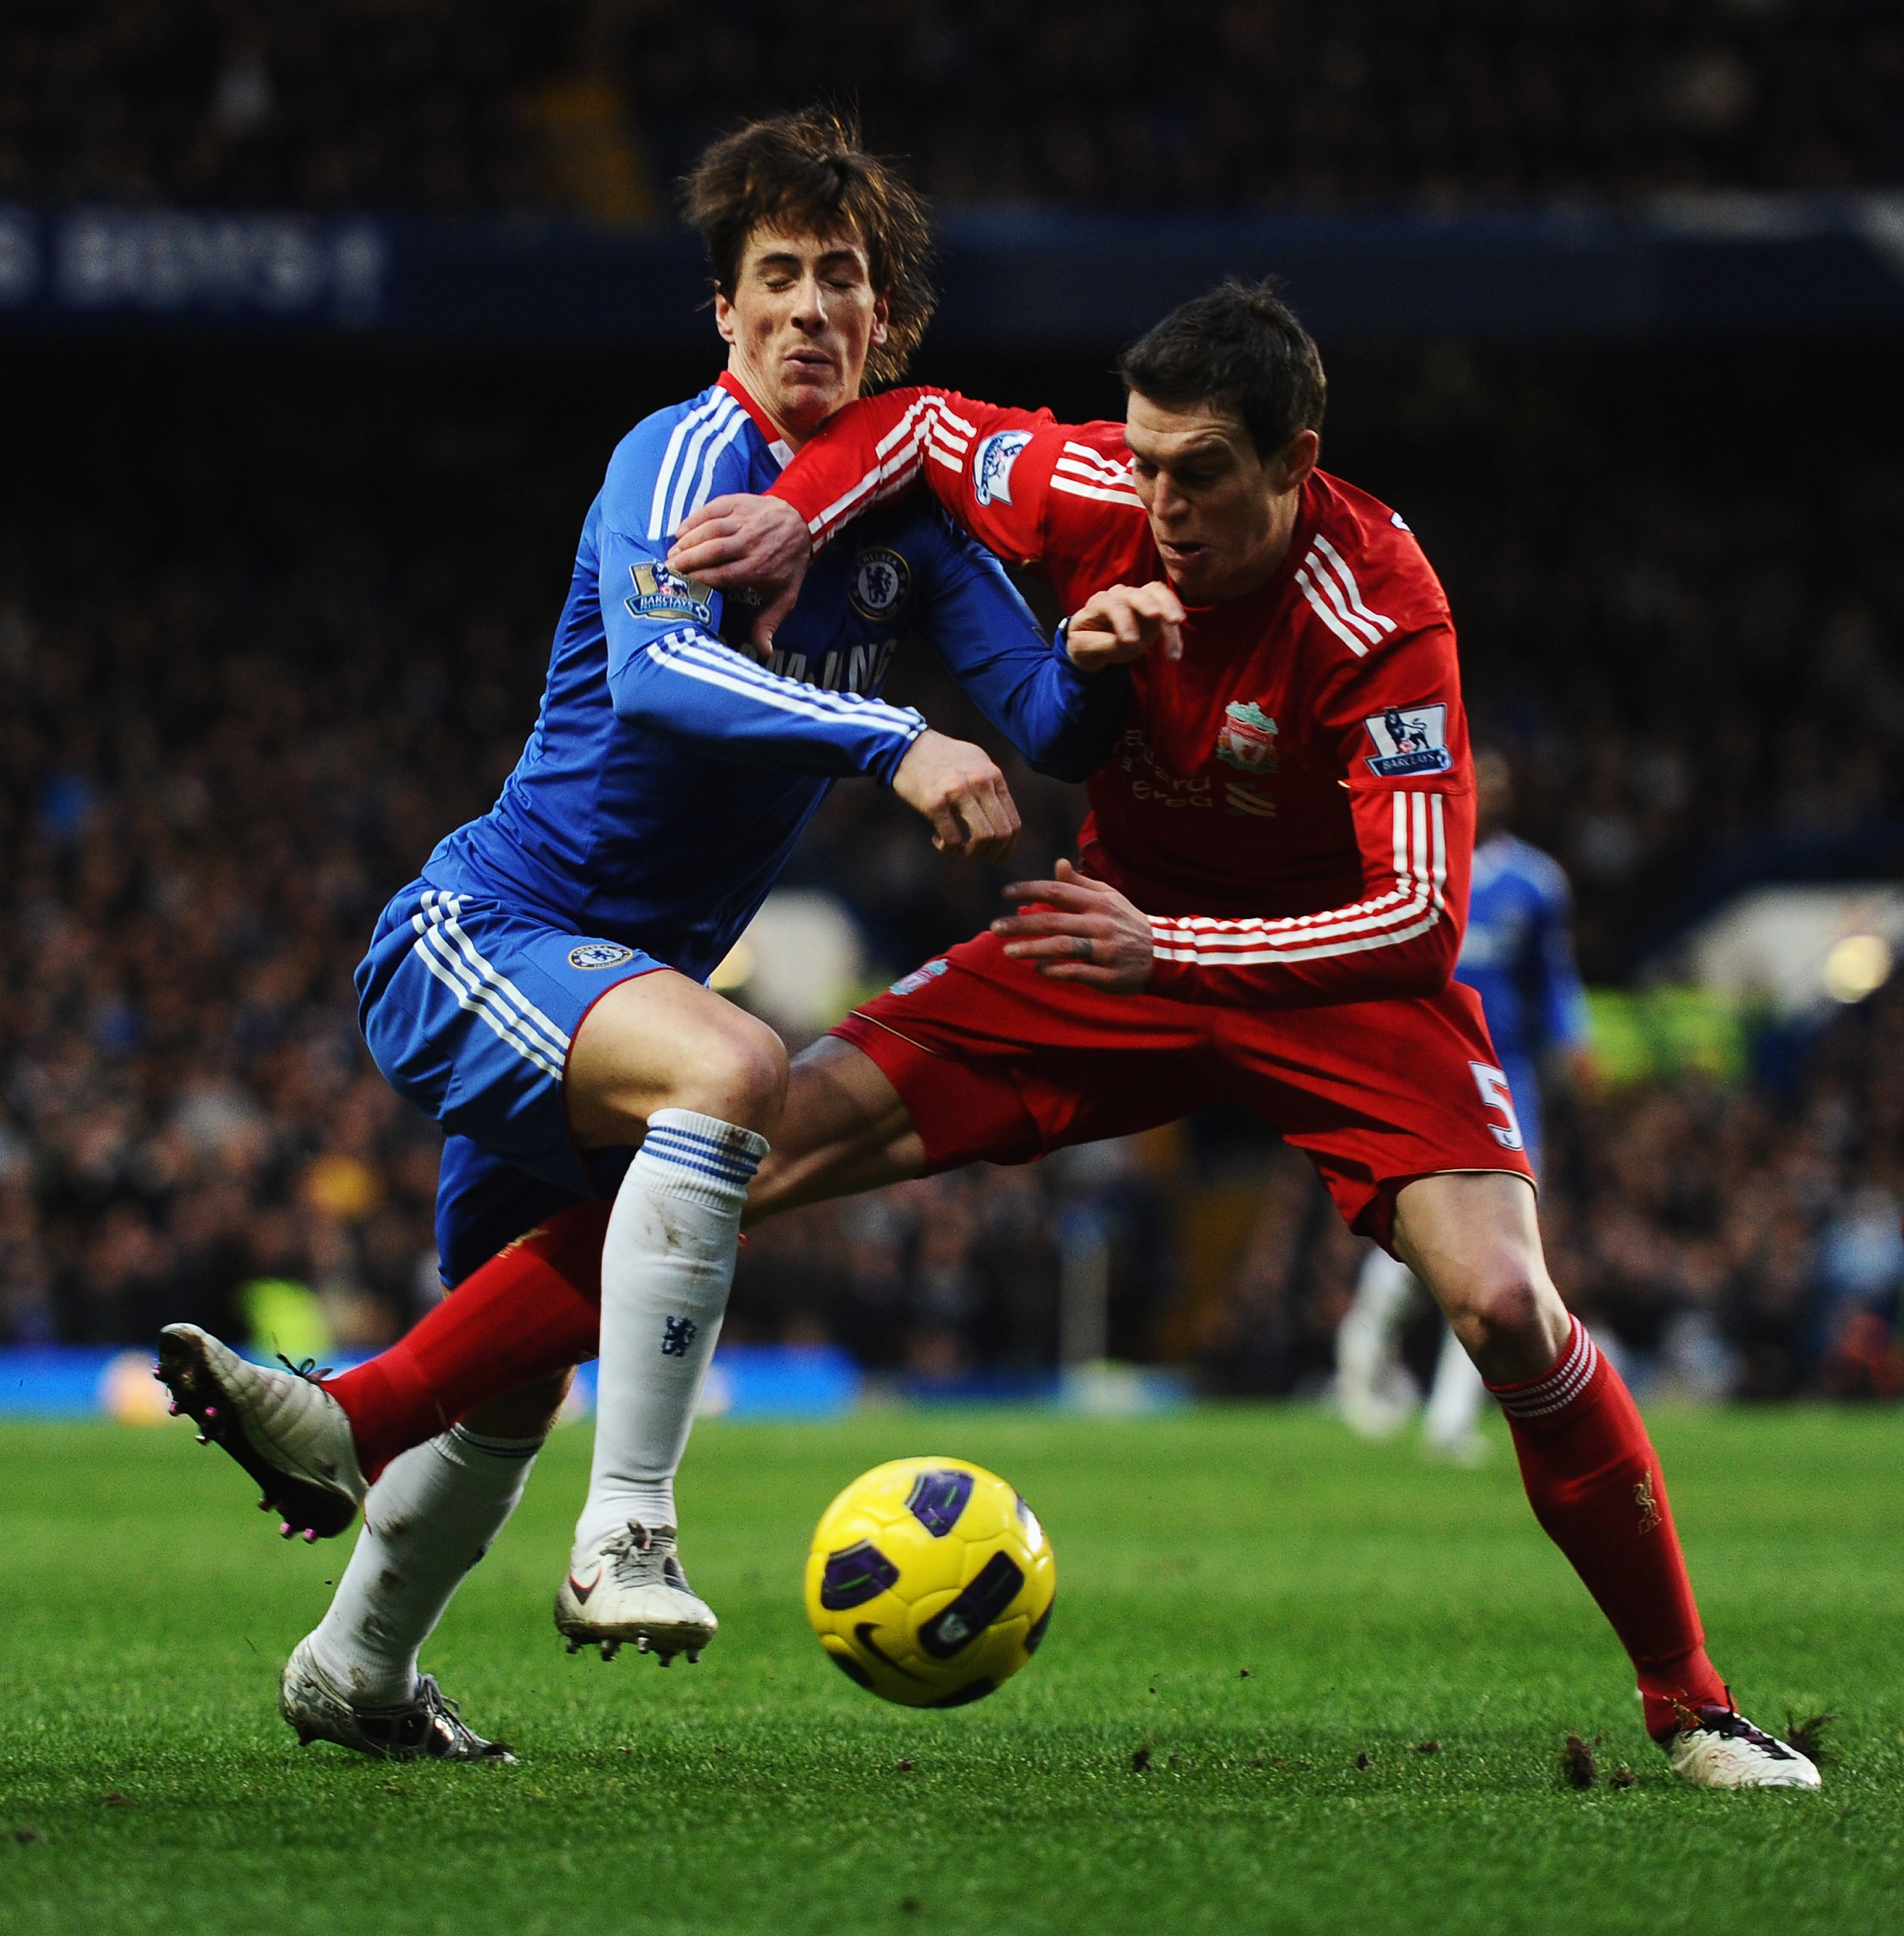 LONDON, ENGLAND - FEBRUARY 06:  Fernando Torres of Chelsea is challenged by Daniel Agger of Liverpool during the Barclays Premier League match between Chelsea and Liverpool at Stamford Bridge on February 6, 2011 in London, England.  (Photo by Laurence Gri